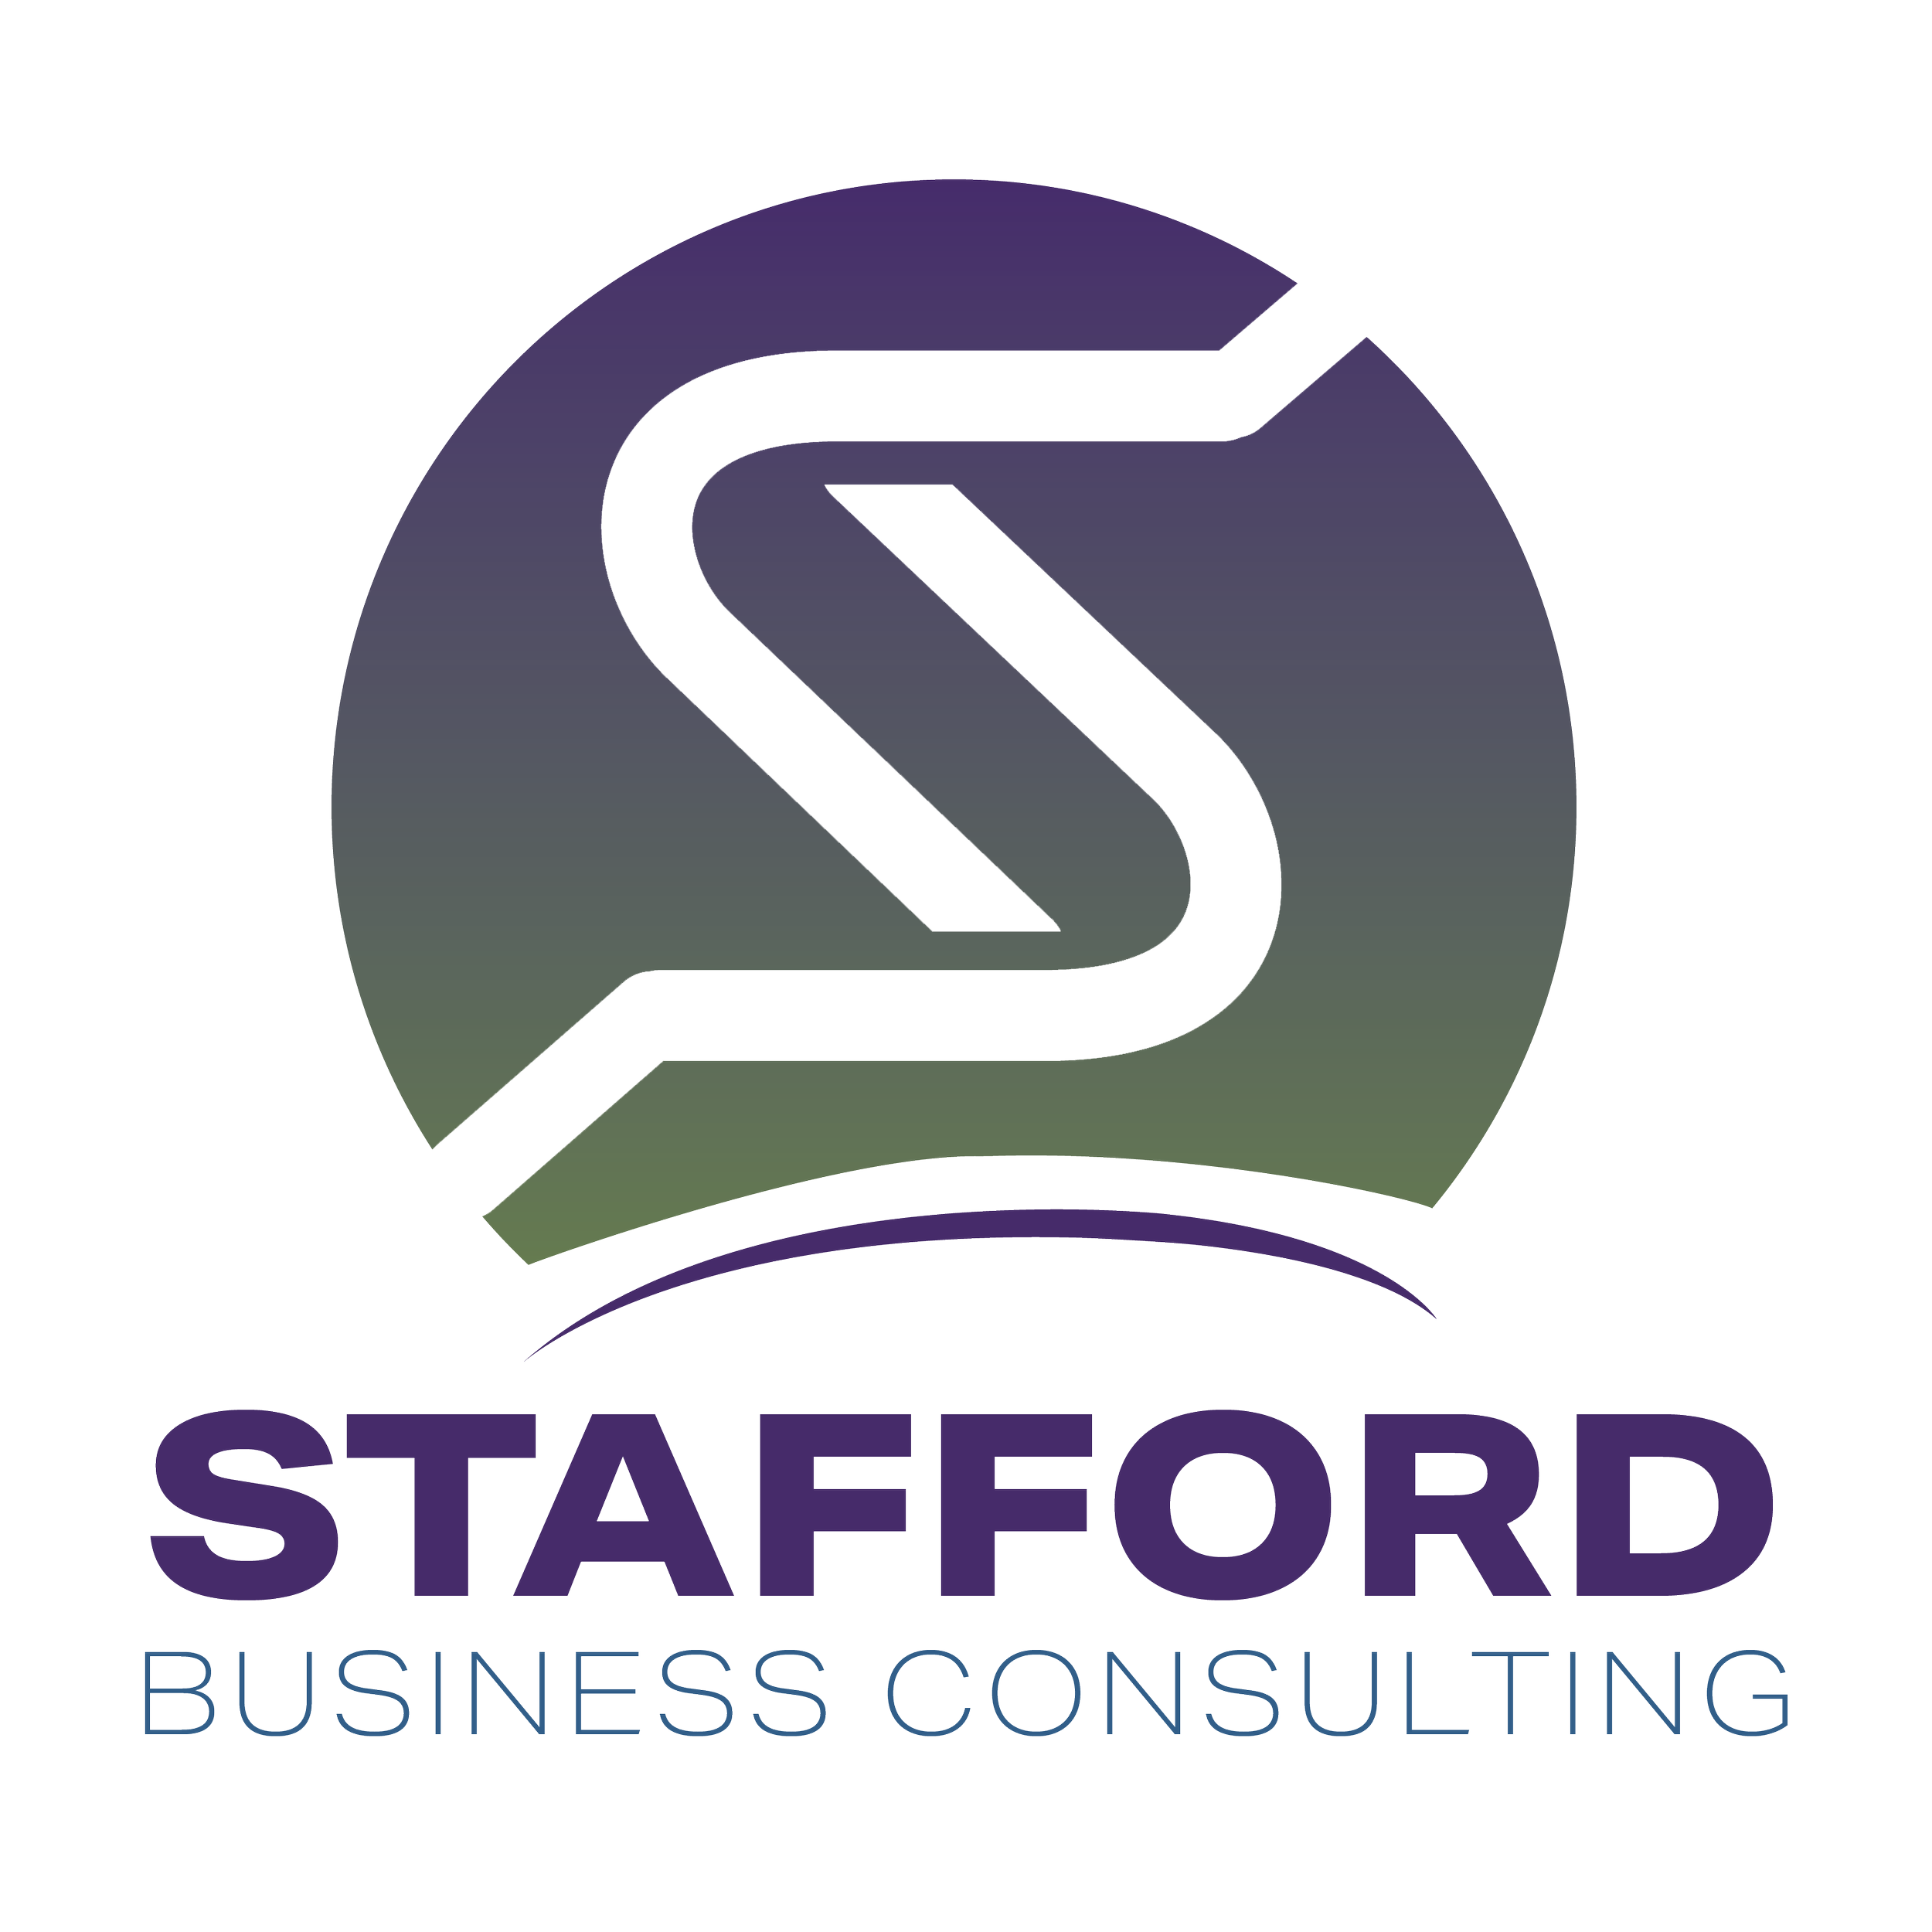 Stafford Business Consulting